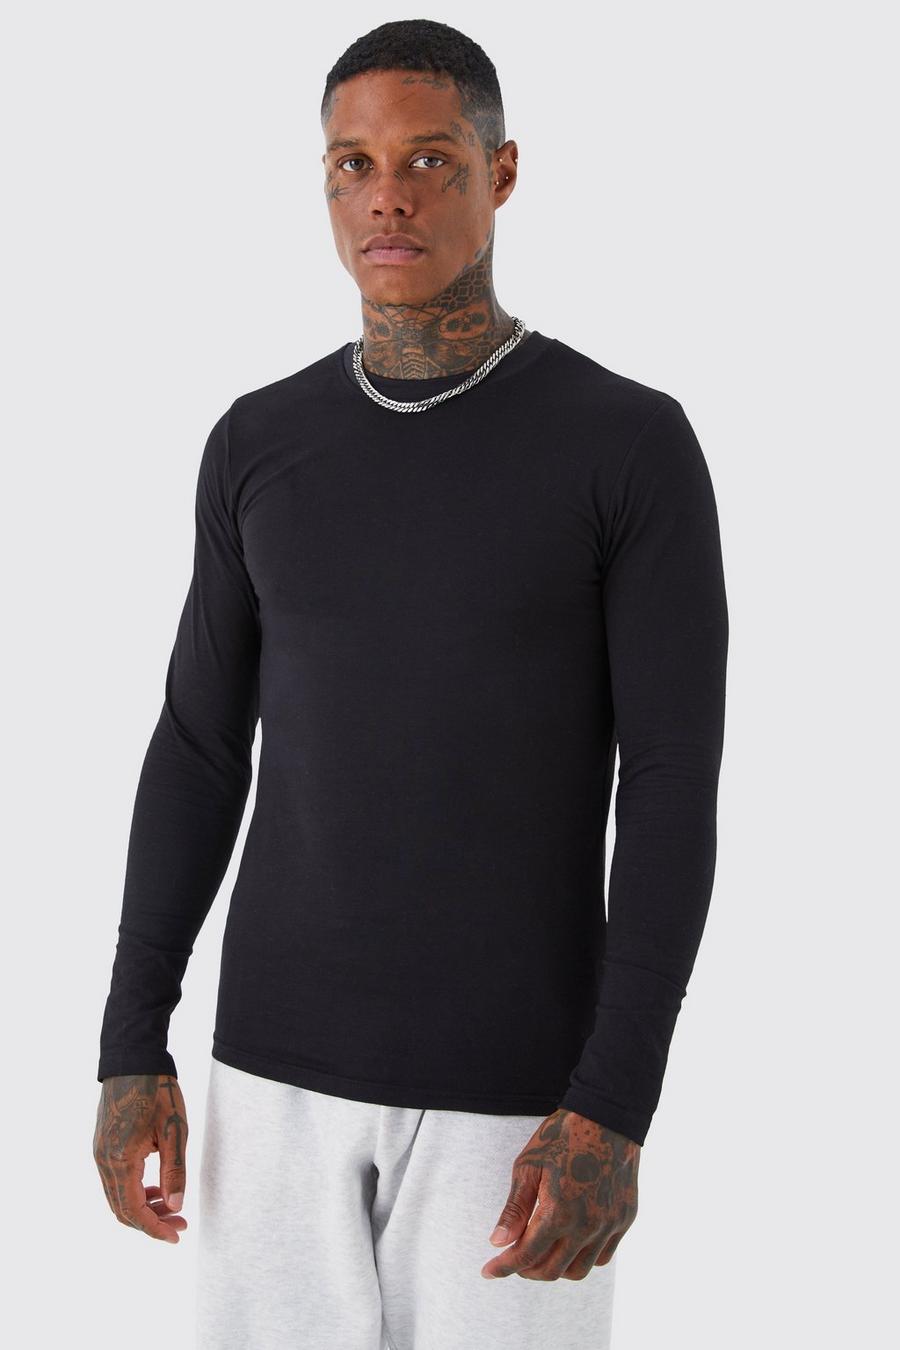 Black Long Sleeve Muscle Fit T-shirt